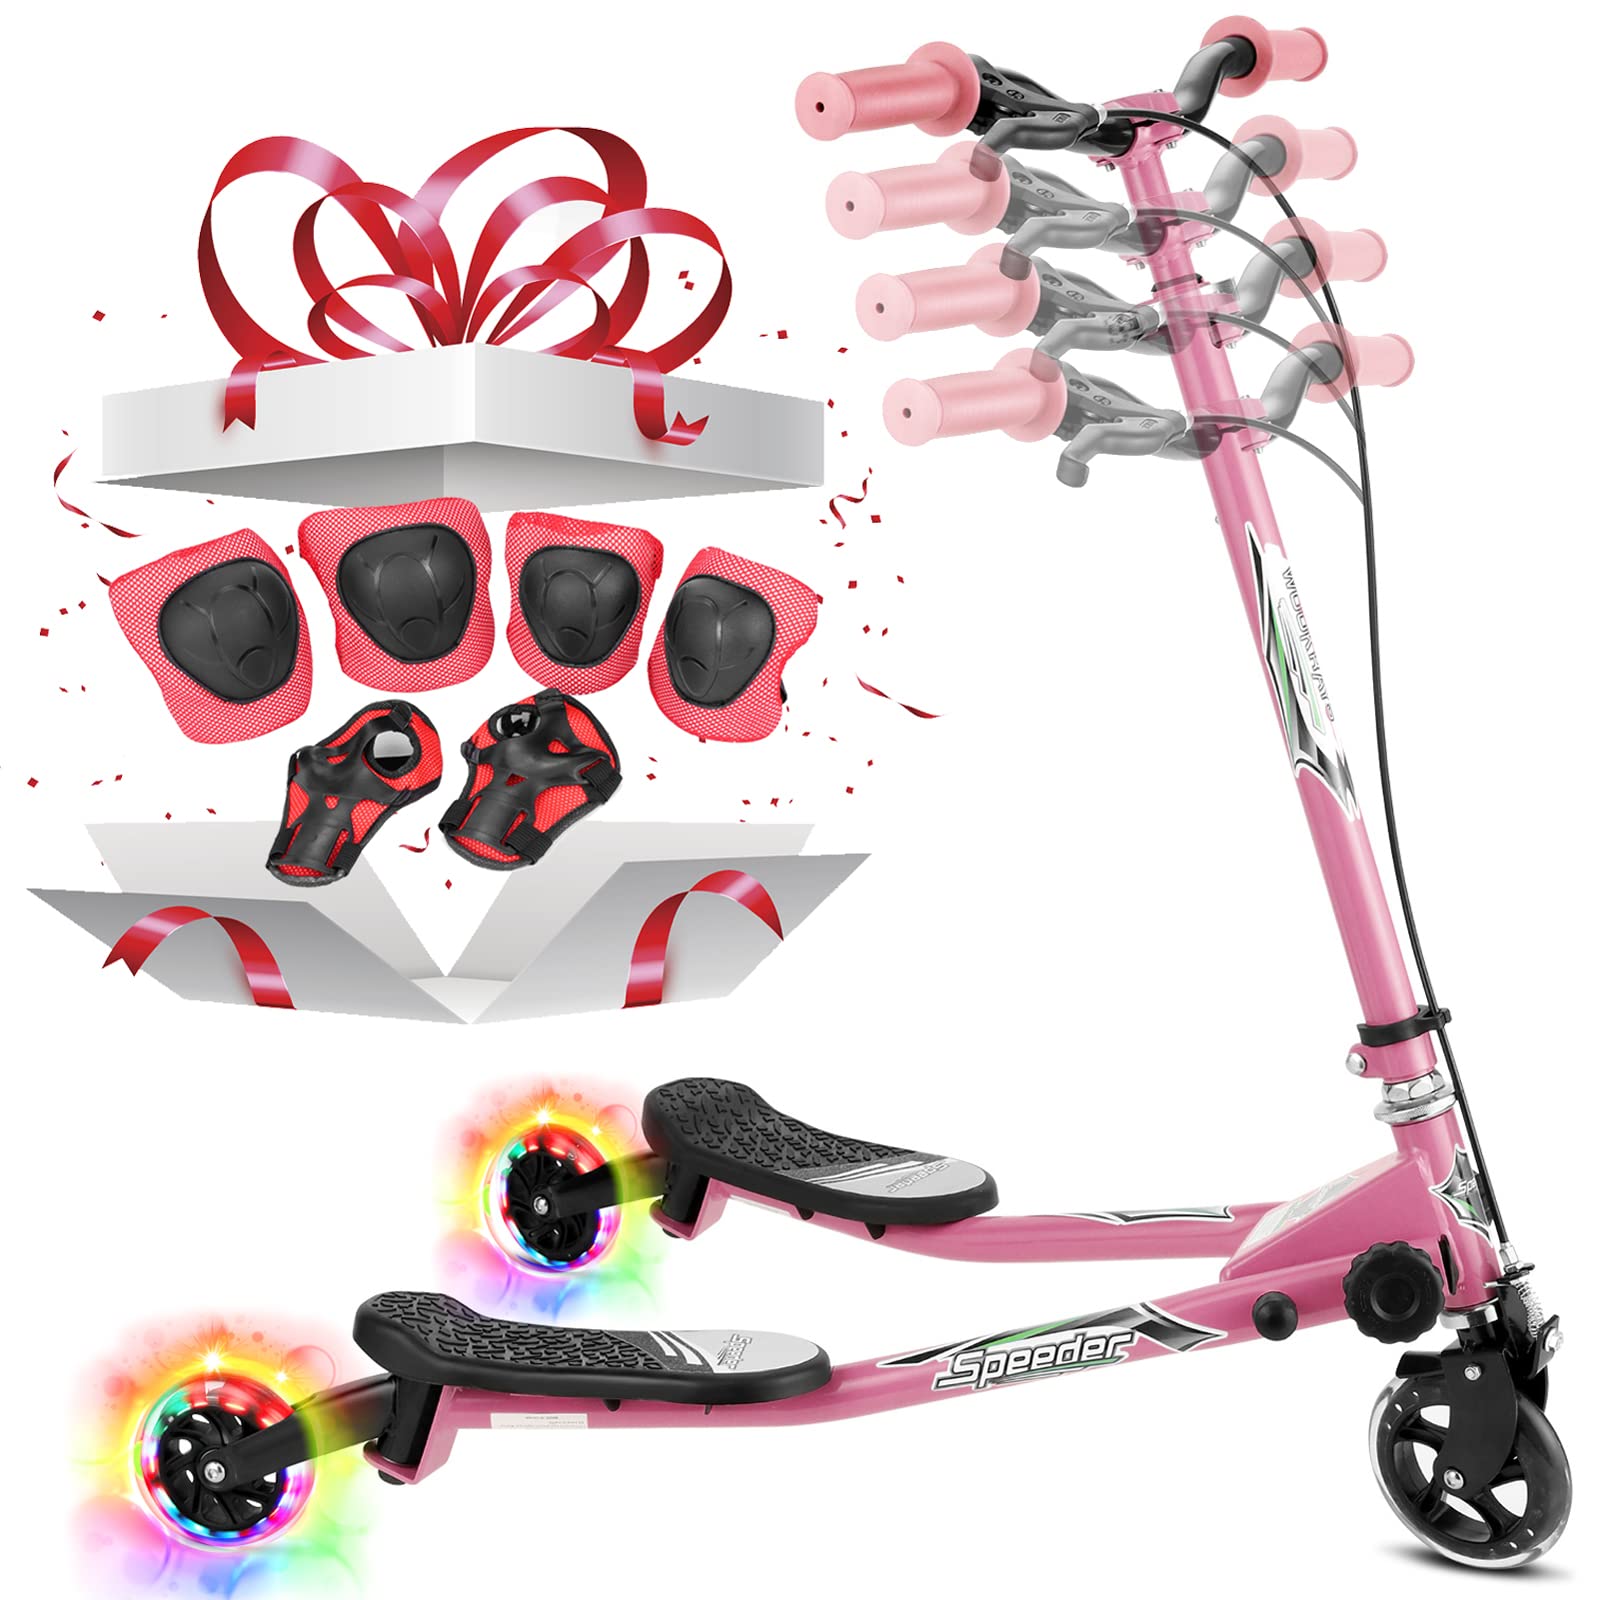 LED Light-Up Swing Wiggle Scooter Kids Three Wheels Drifting Speeder with 4 Level Adjustable Handlebar and Quick-Release Folding System for Boys an...